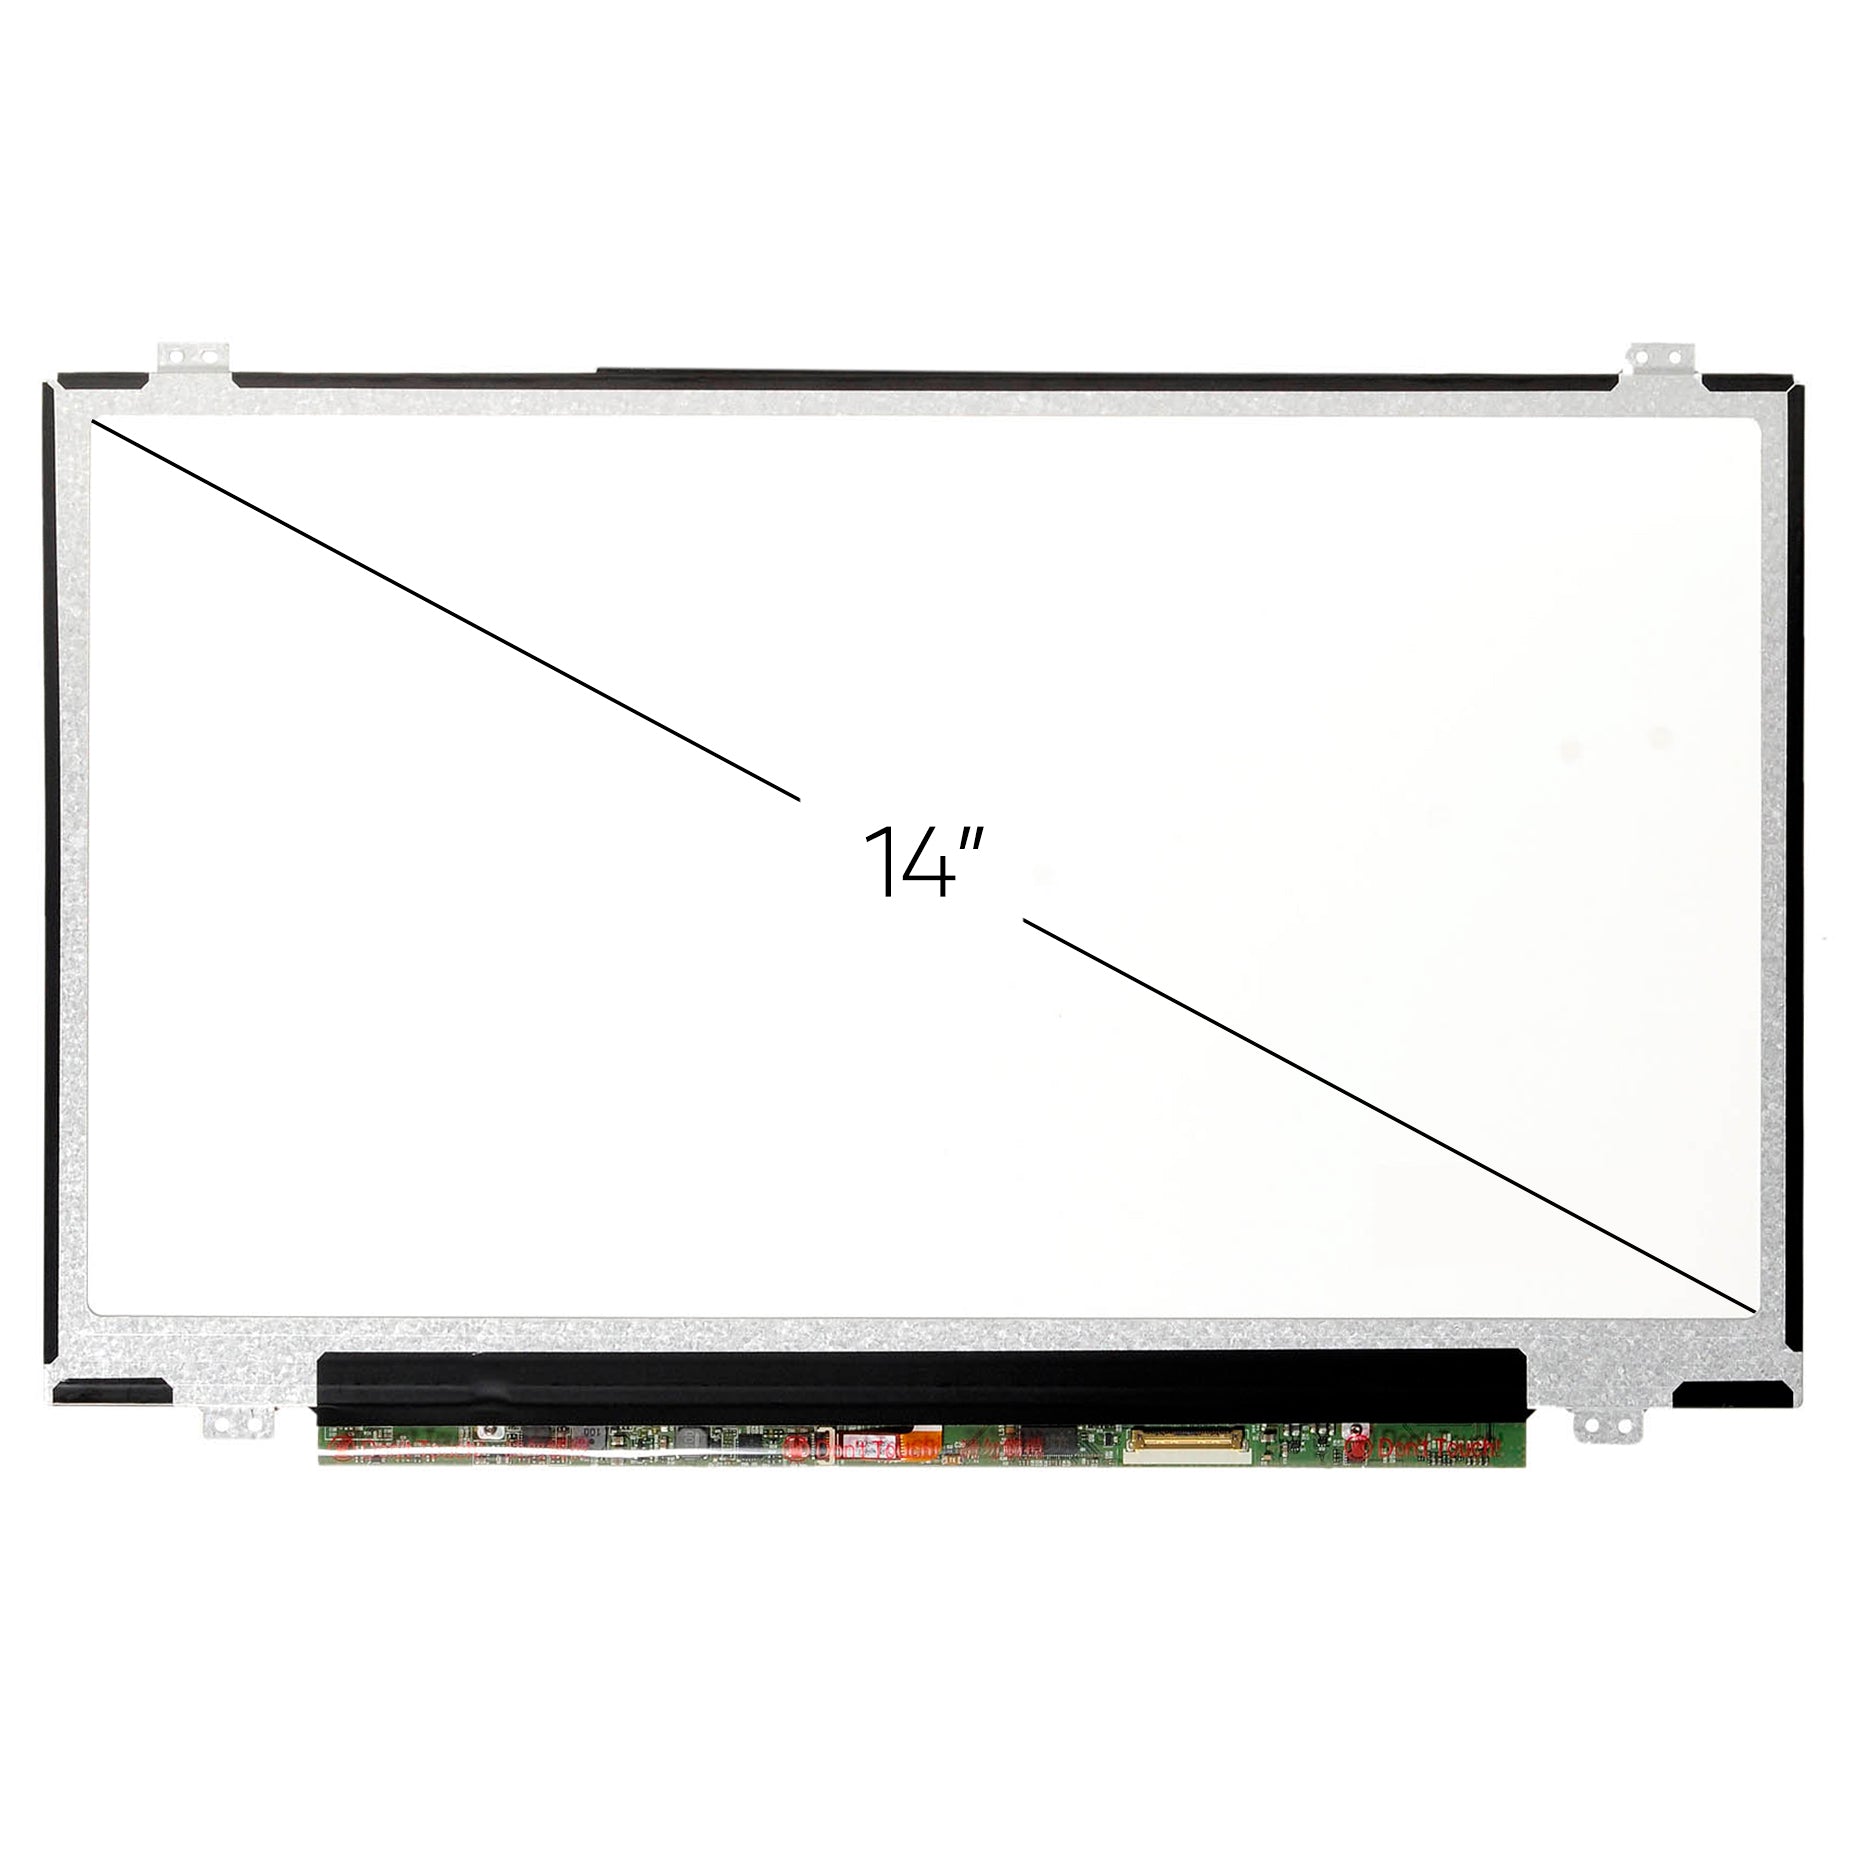 Screen Replacement for Lenovo Thinkpad T470 20JN000J FHD 1920x1080 IPS Matte LCD LED Display